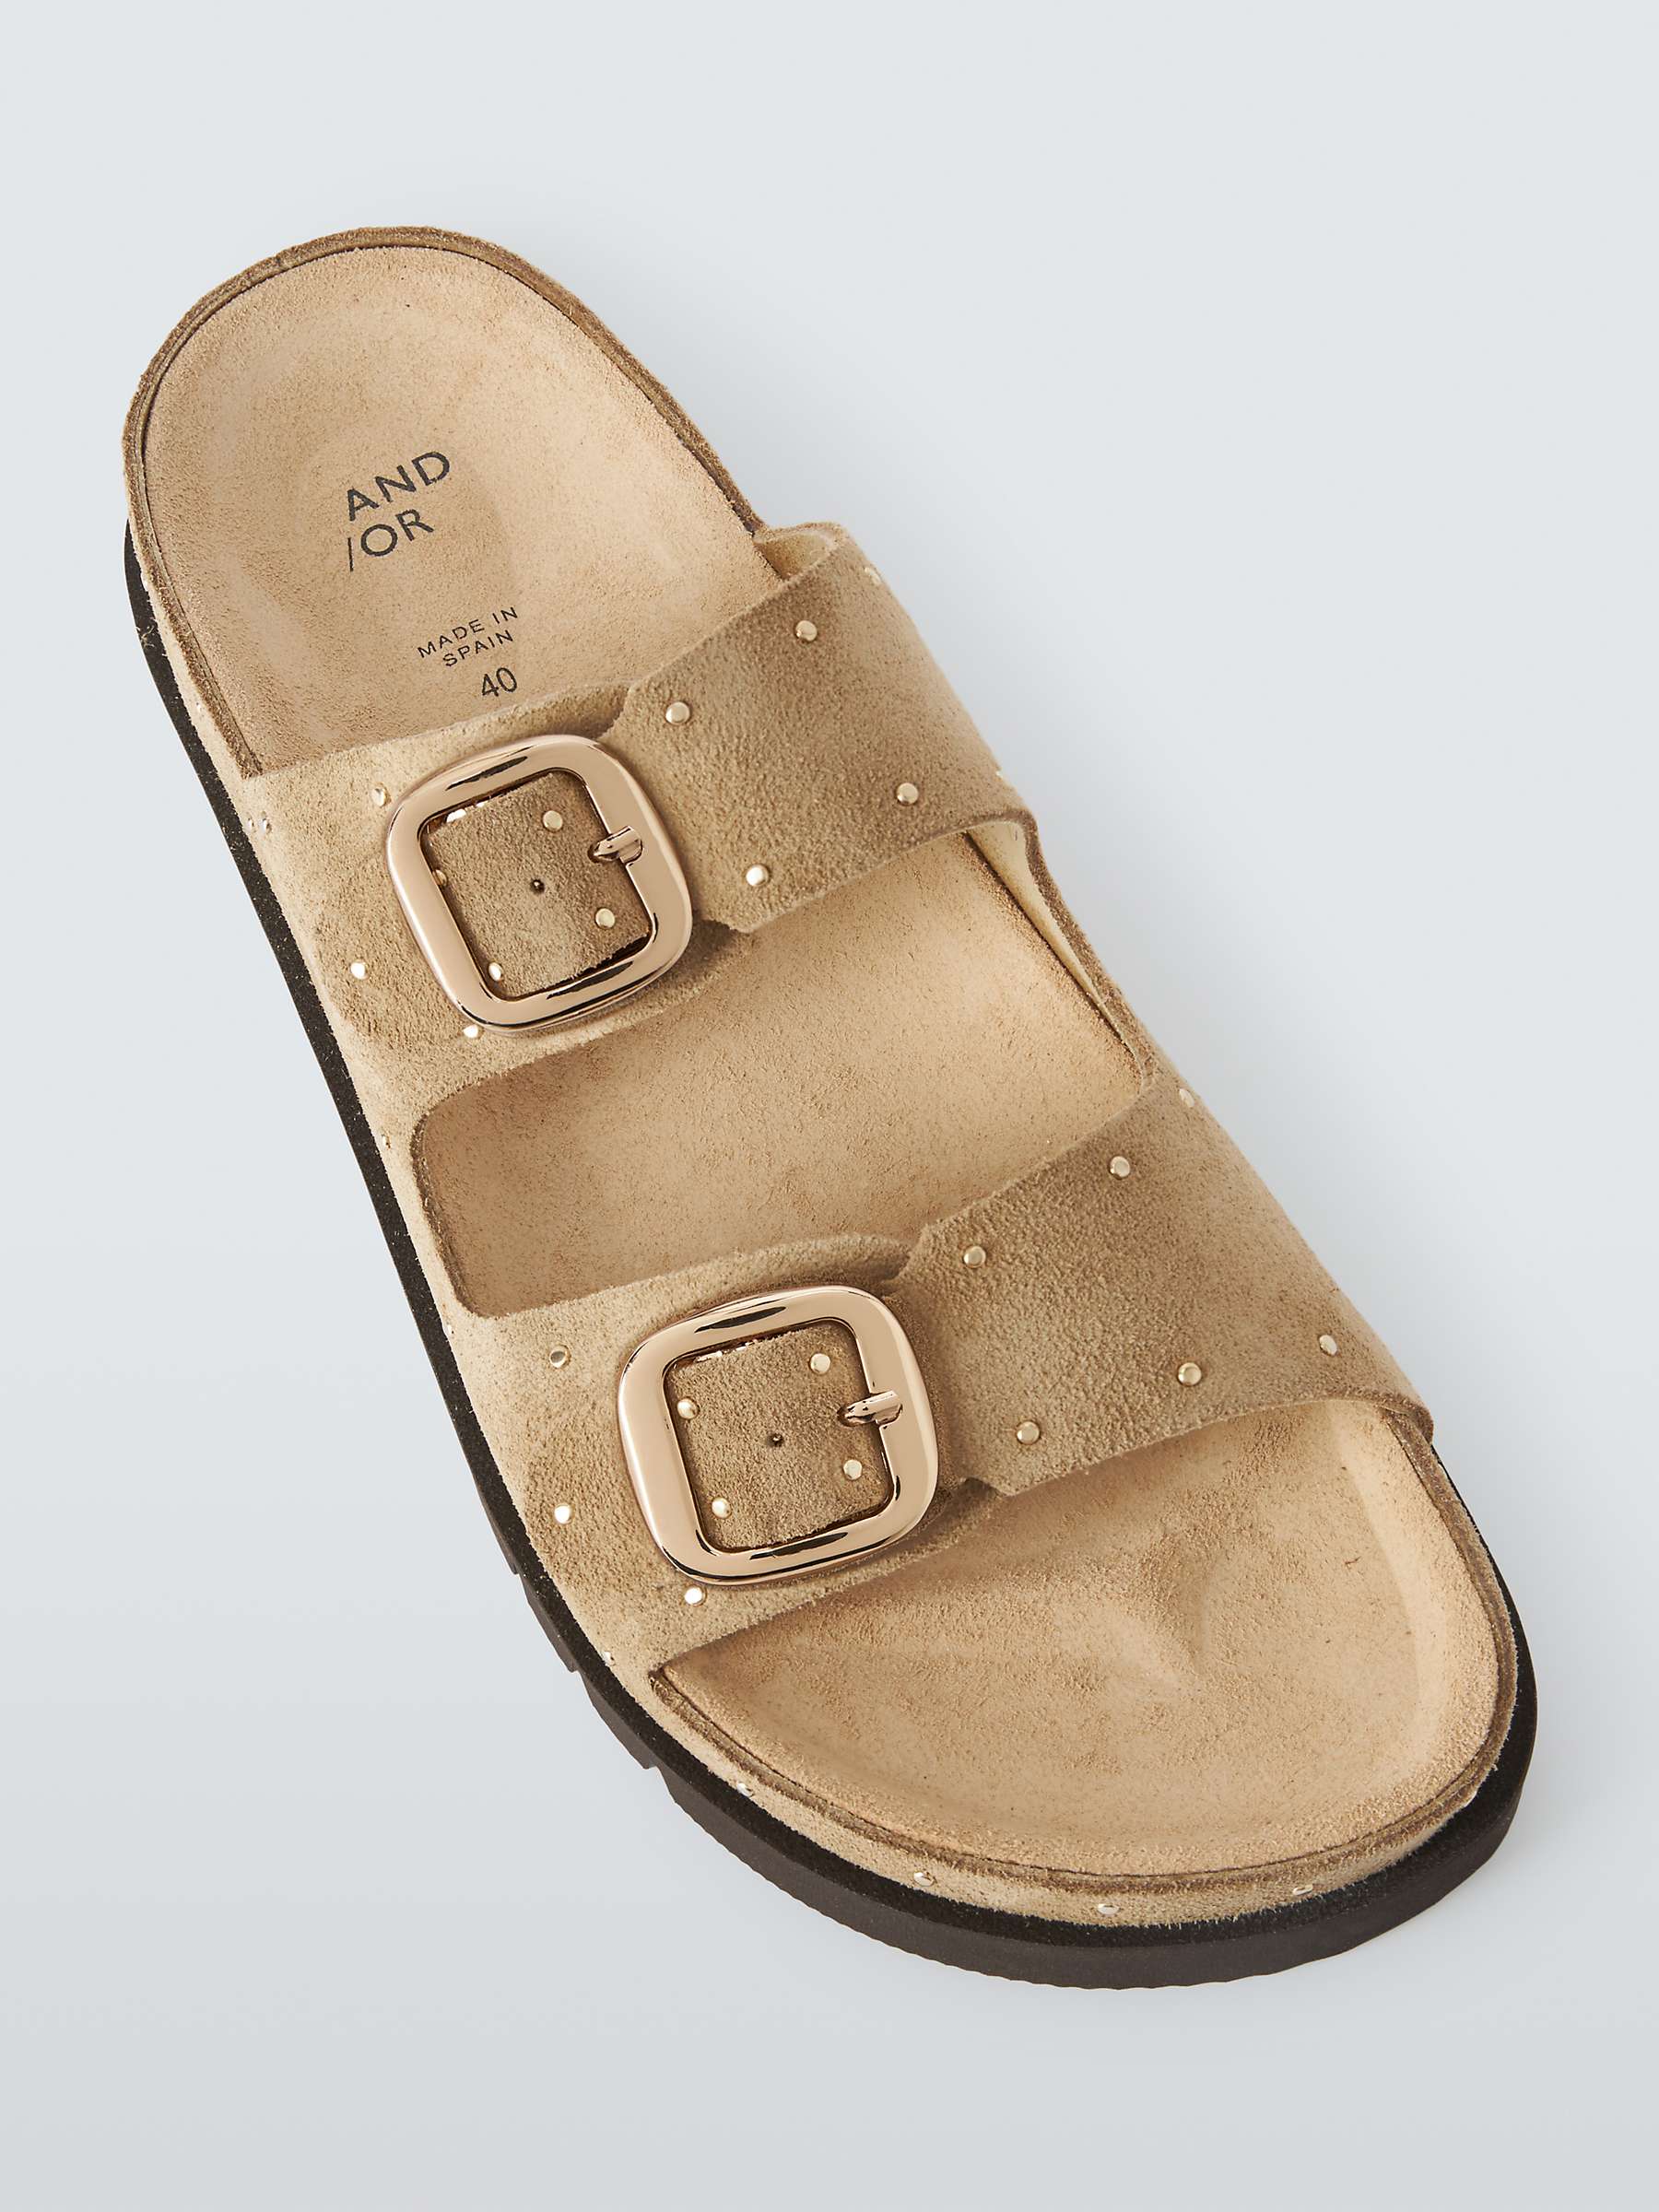 Buy AND/OR Lexxie Adjustable Strap Suede Sandals, Brown Online at johnlewis.com